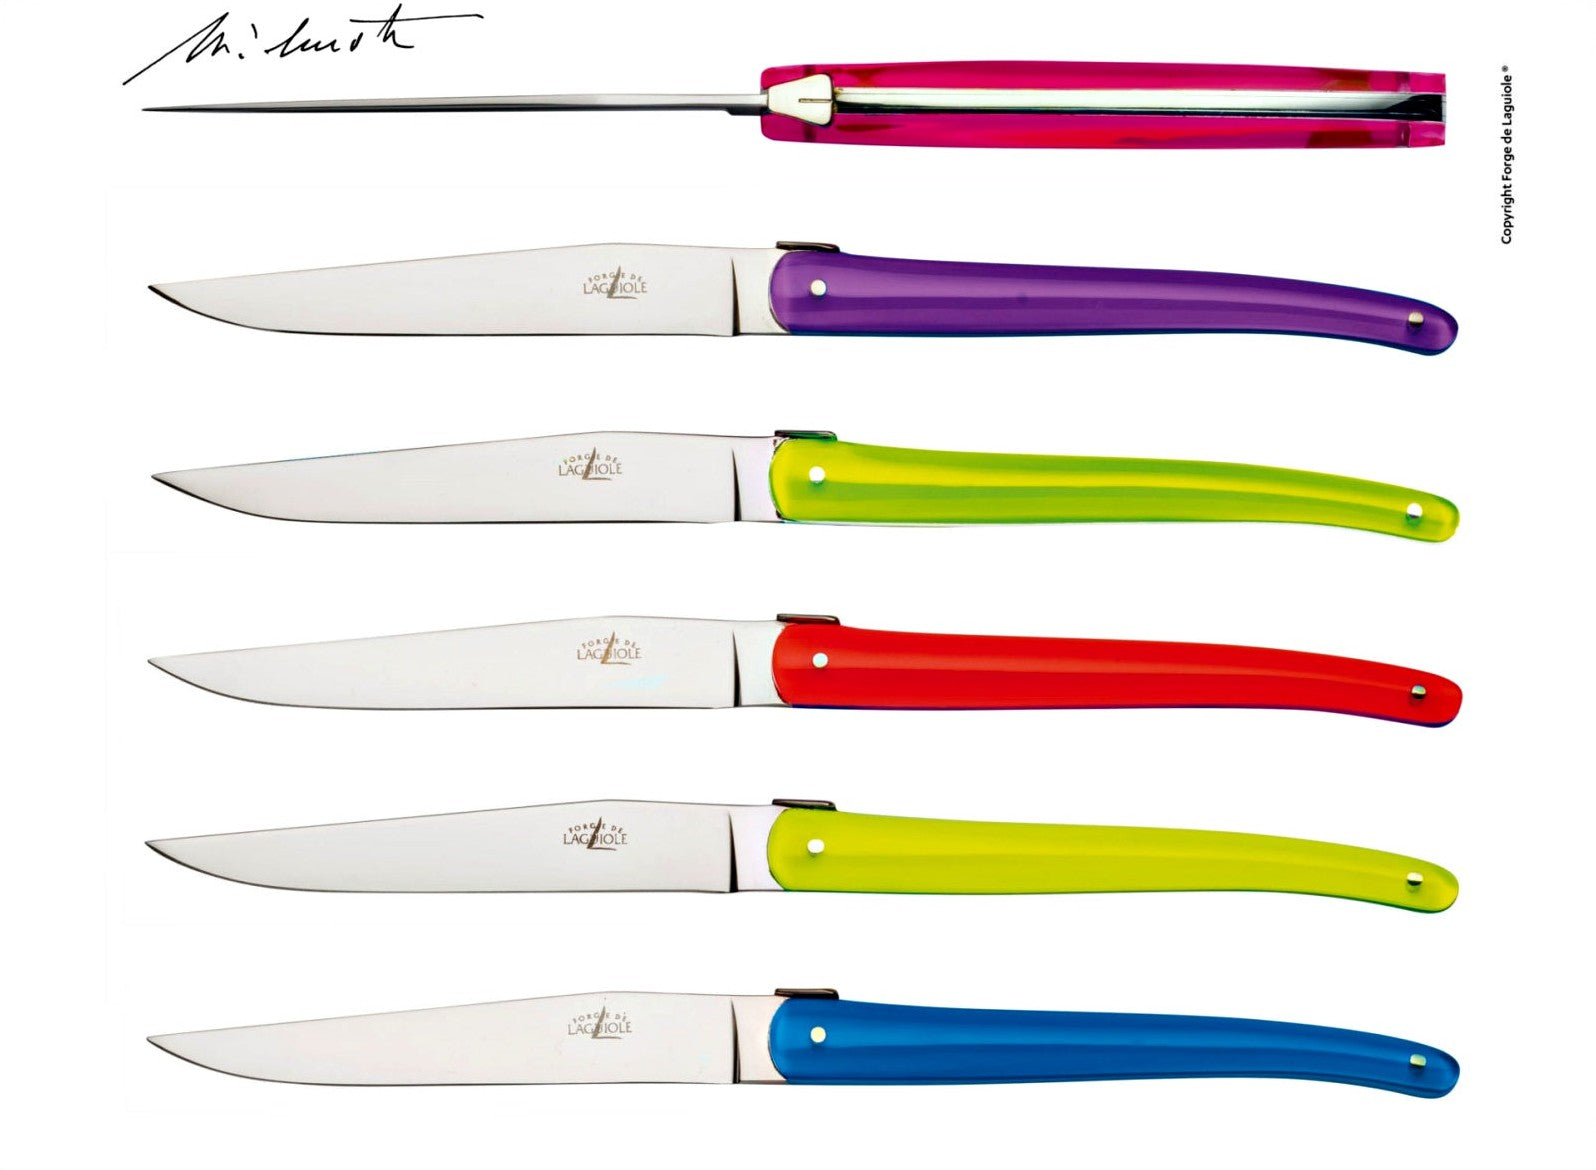 French Laguiole Table knives designed by Jean-Michel Wilmotte